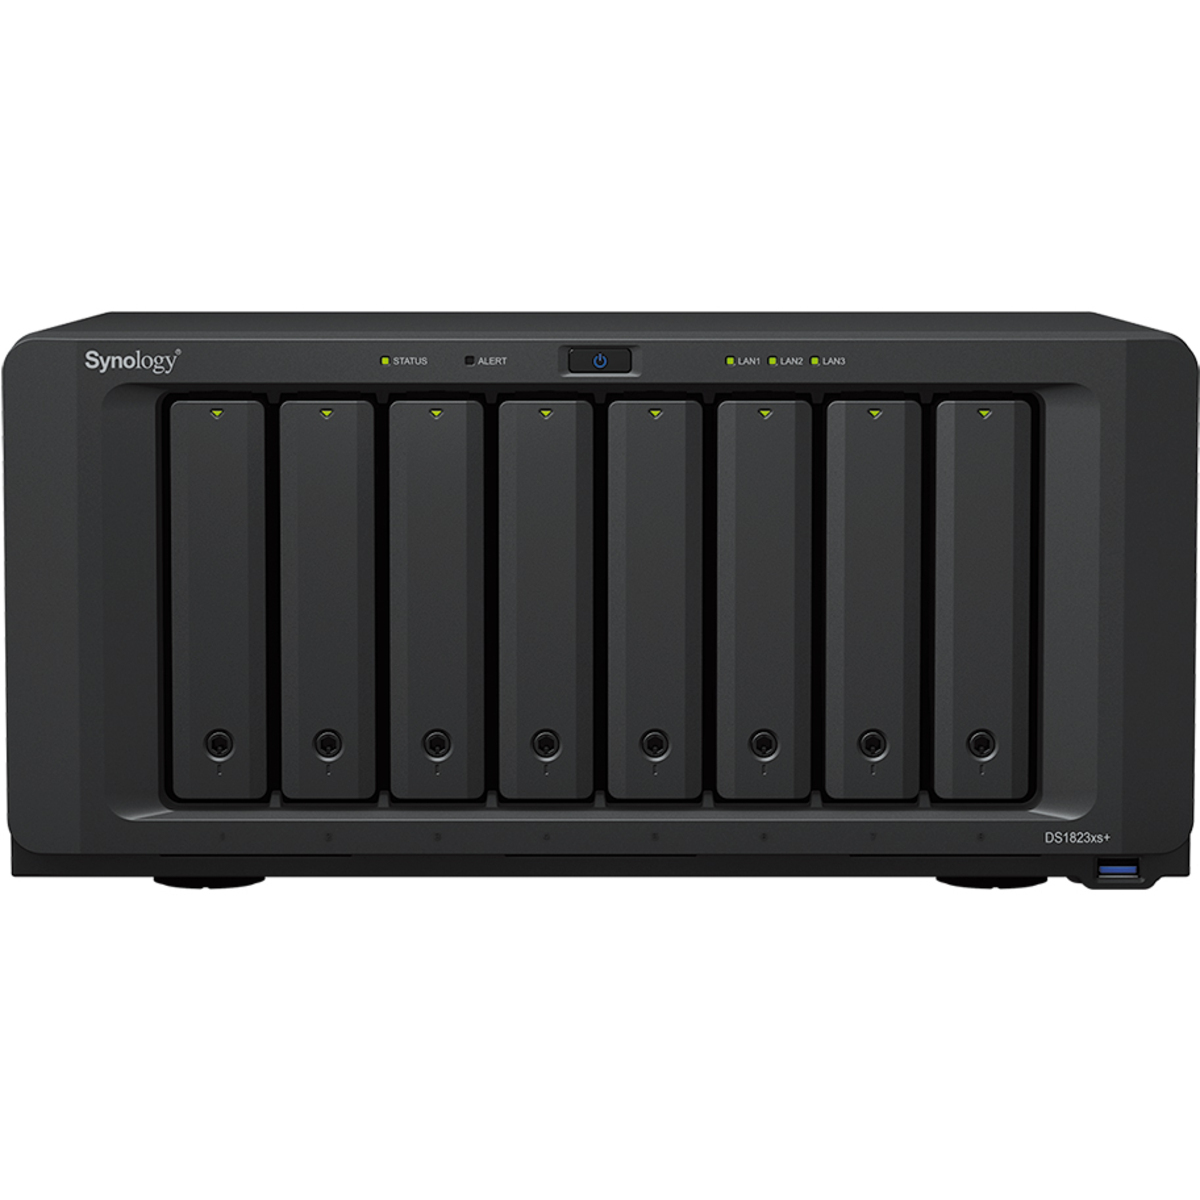 Synology DiskStation DS1823xs+ 56tb 8-Bay Desktop Multimedia / Power User / Business NAS - Network Attached Storage Device 8x7tb Synology SAT5210 Series SAT5210-7000G 2.5 530/500MB/s SATA 6Gb/s SSD ENTERPRISE Class Drives Installed - Burn-In Tested DiskStation DS1823xs+